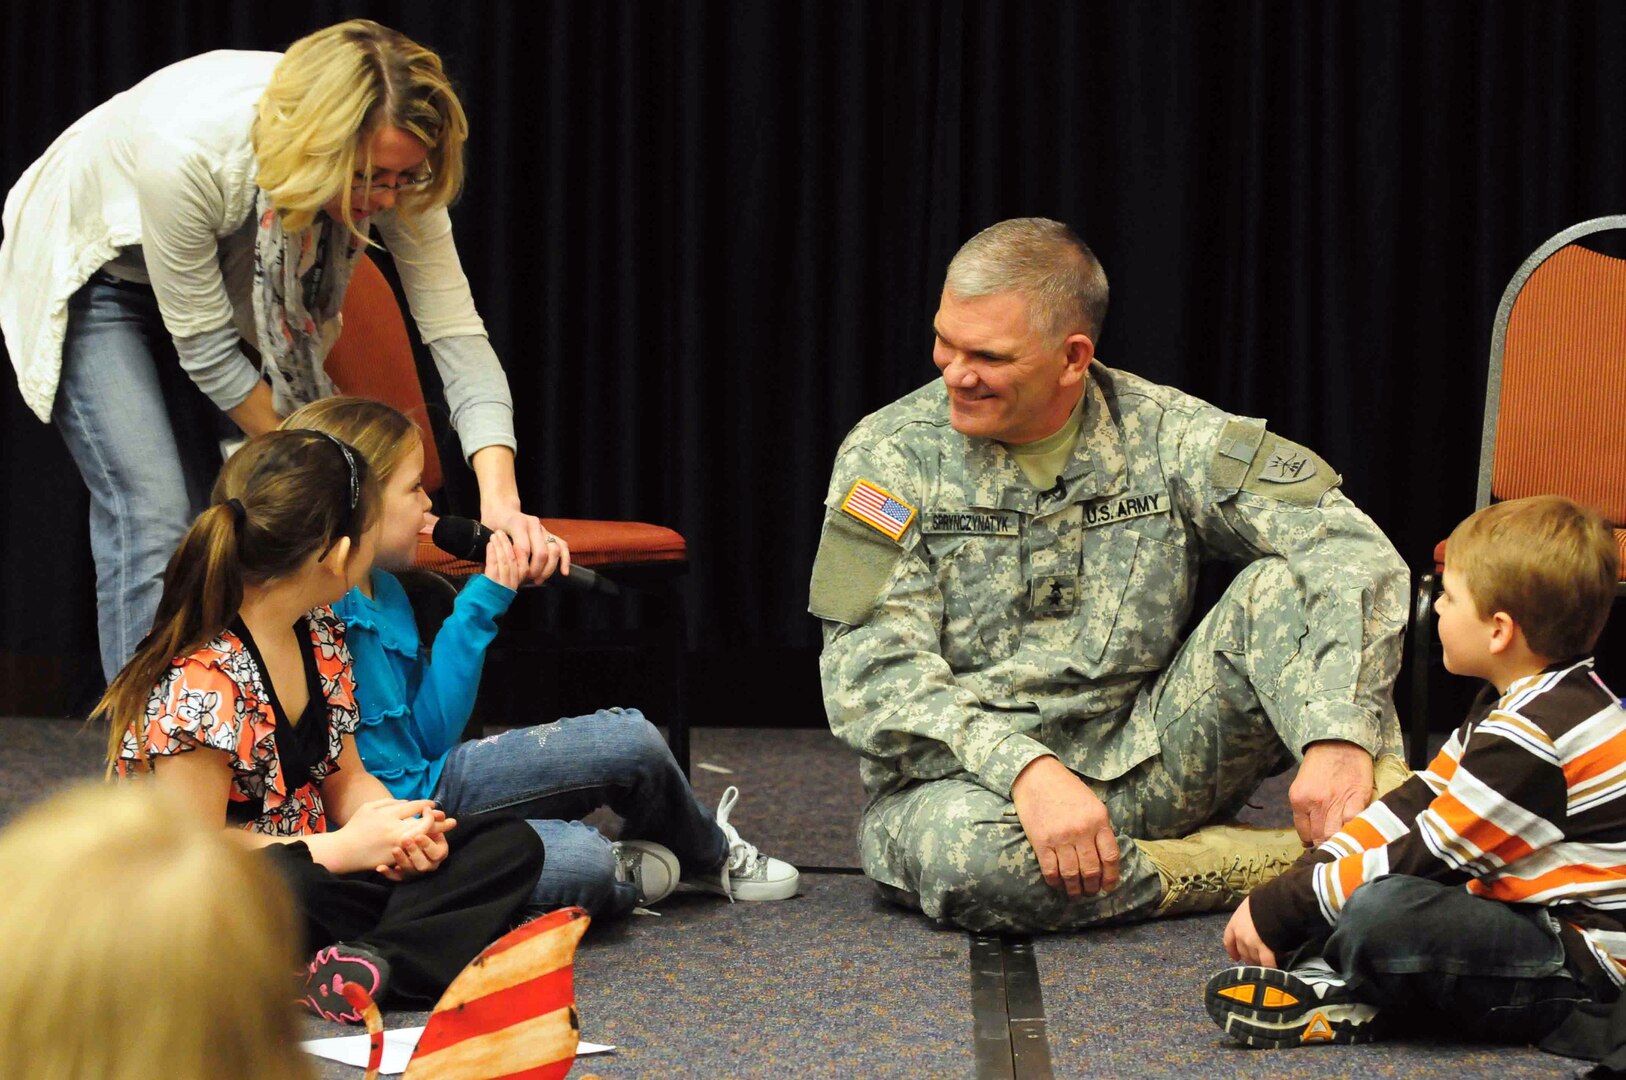 Jessica Clark-Woinarowicz, North Dakota National Guard state youth coordinator, holds the microphone for Guard children to ask Army Maj. Gen. David Sprynczynatyk, North Dakota adjutant general, some impromptu questions at the Adjutant General's Symposium for Families in Bismarck, N.D., March 5.